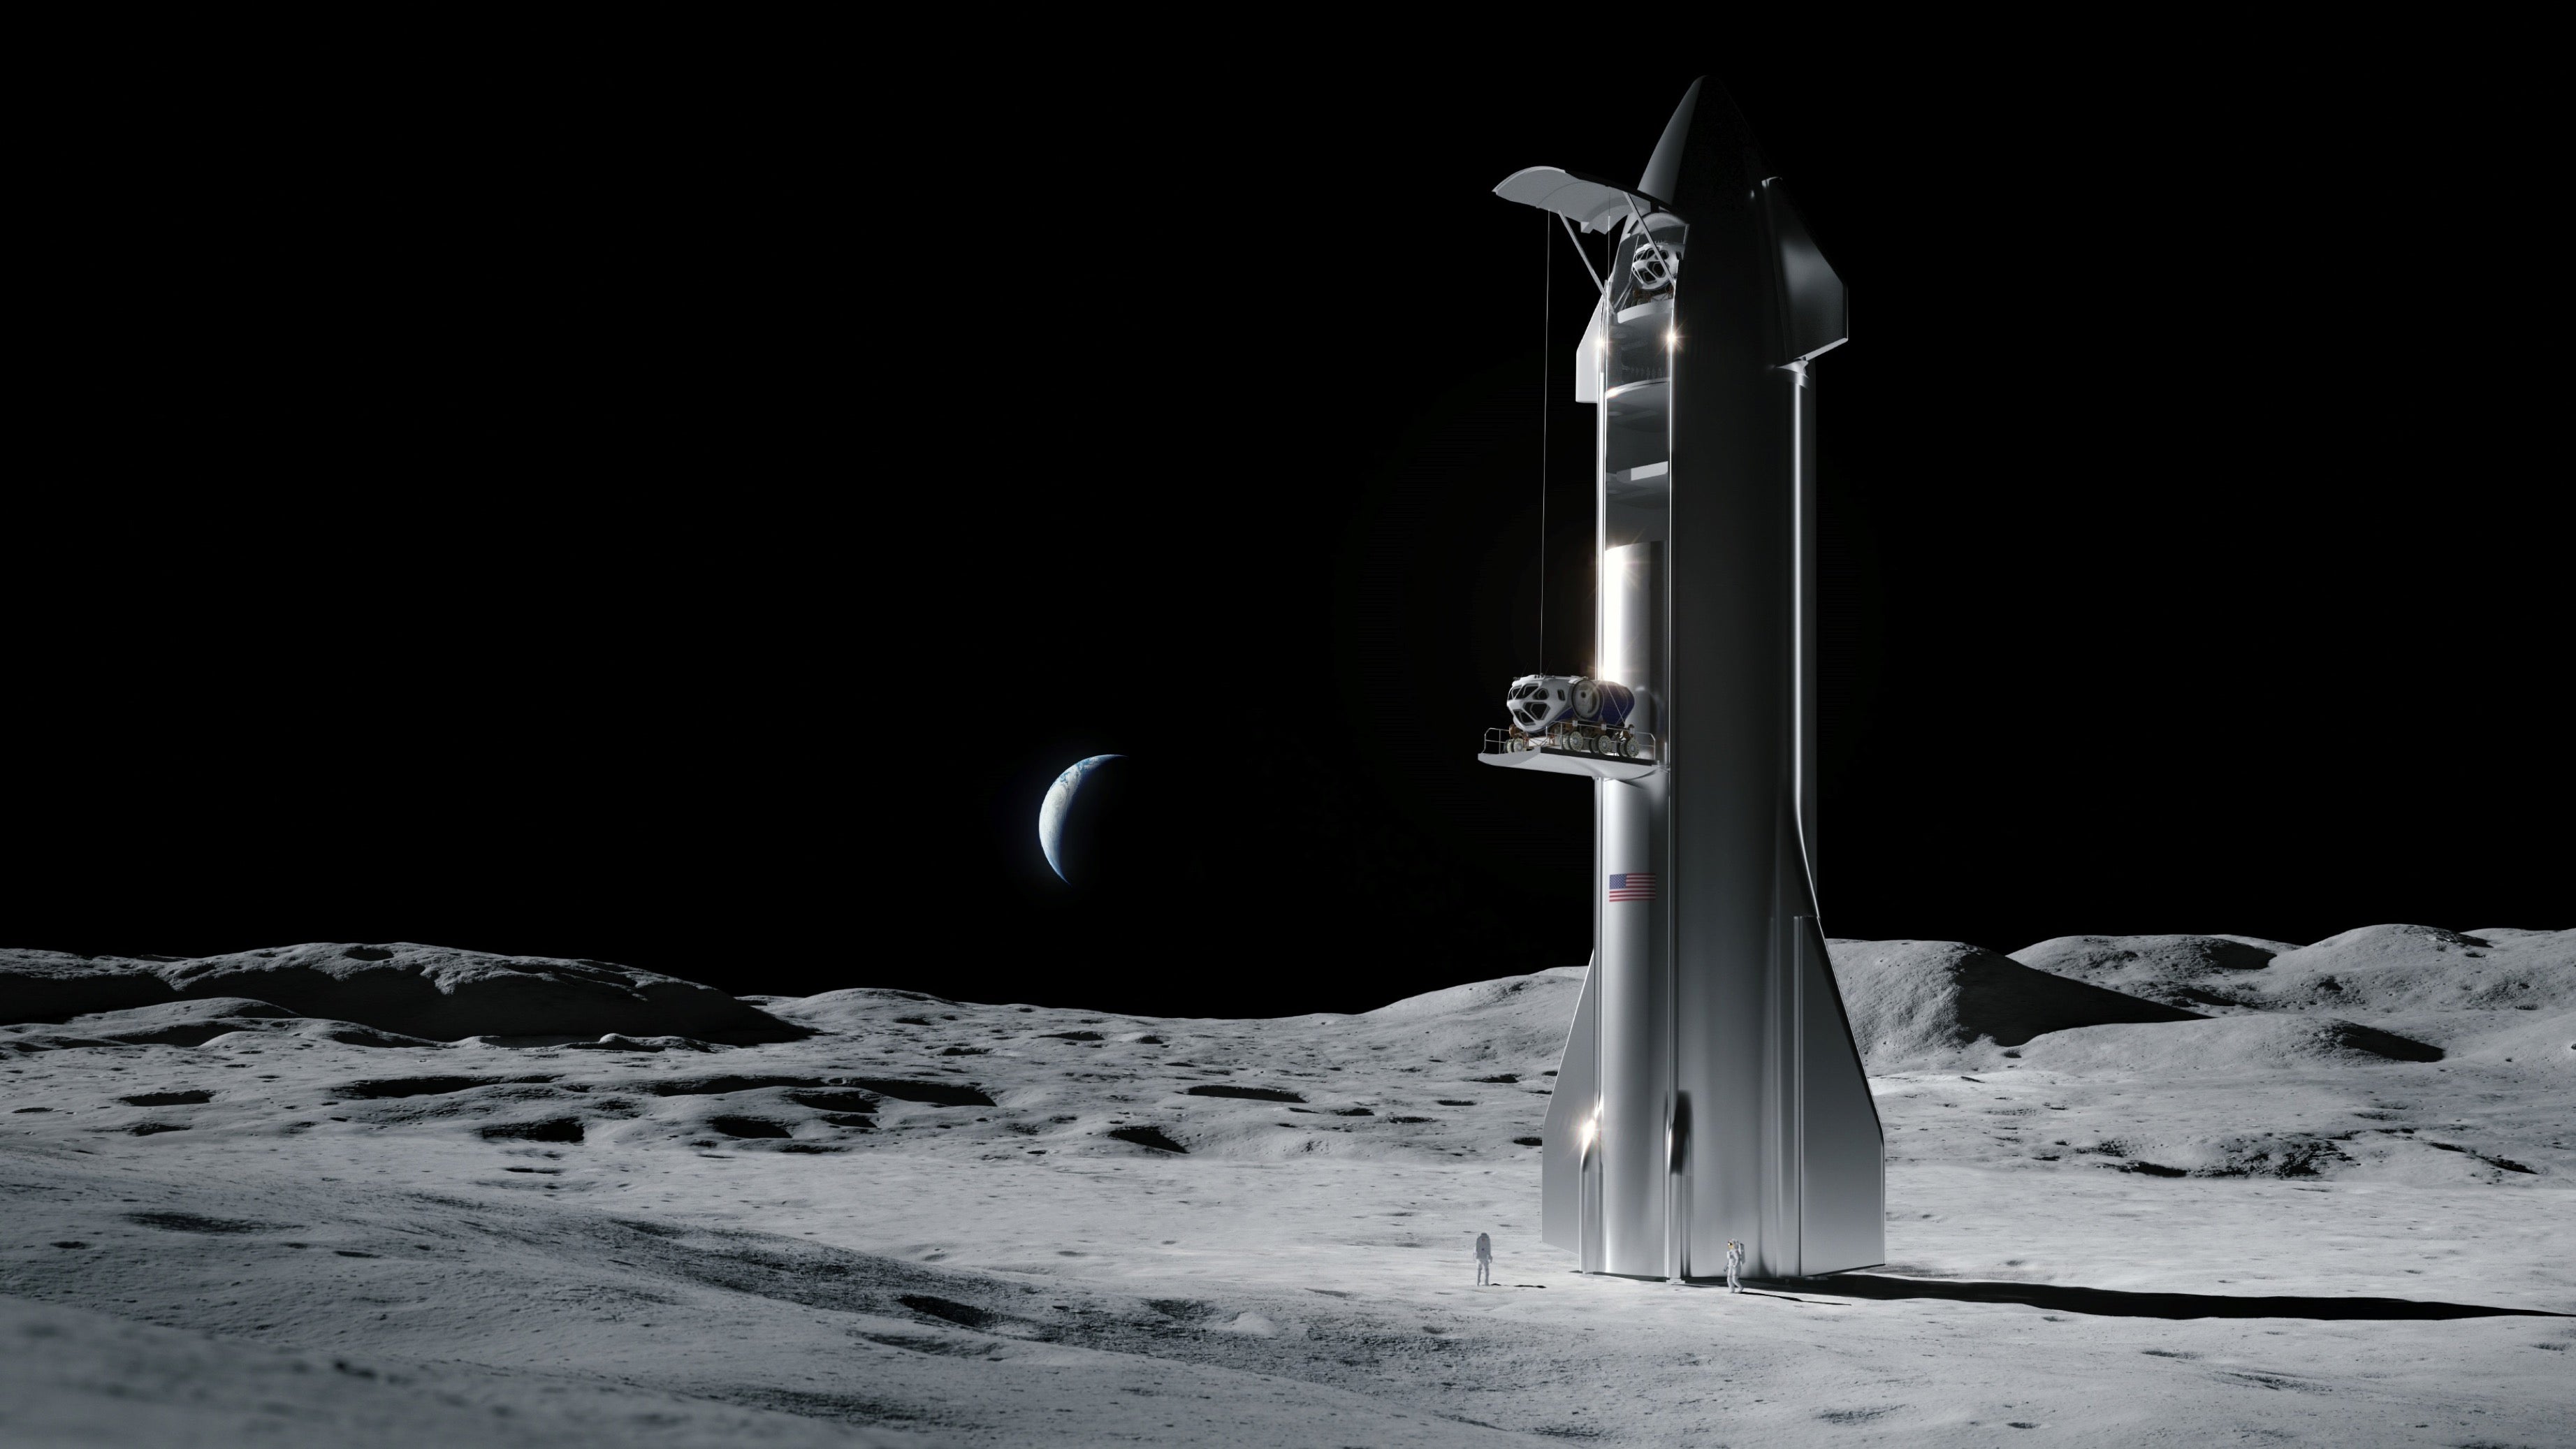 SpaceX releases a Starship 'User Guide' offering insight into its future capabilities